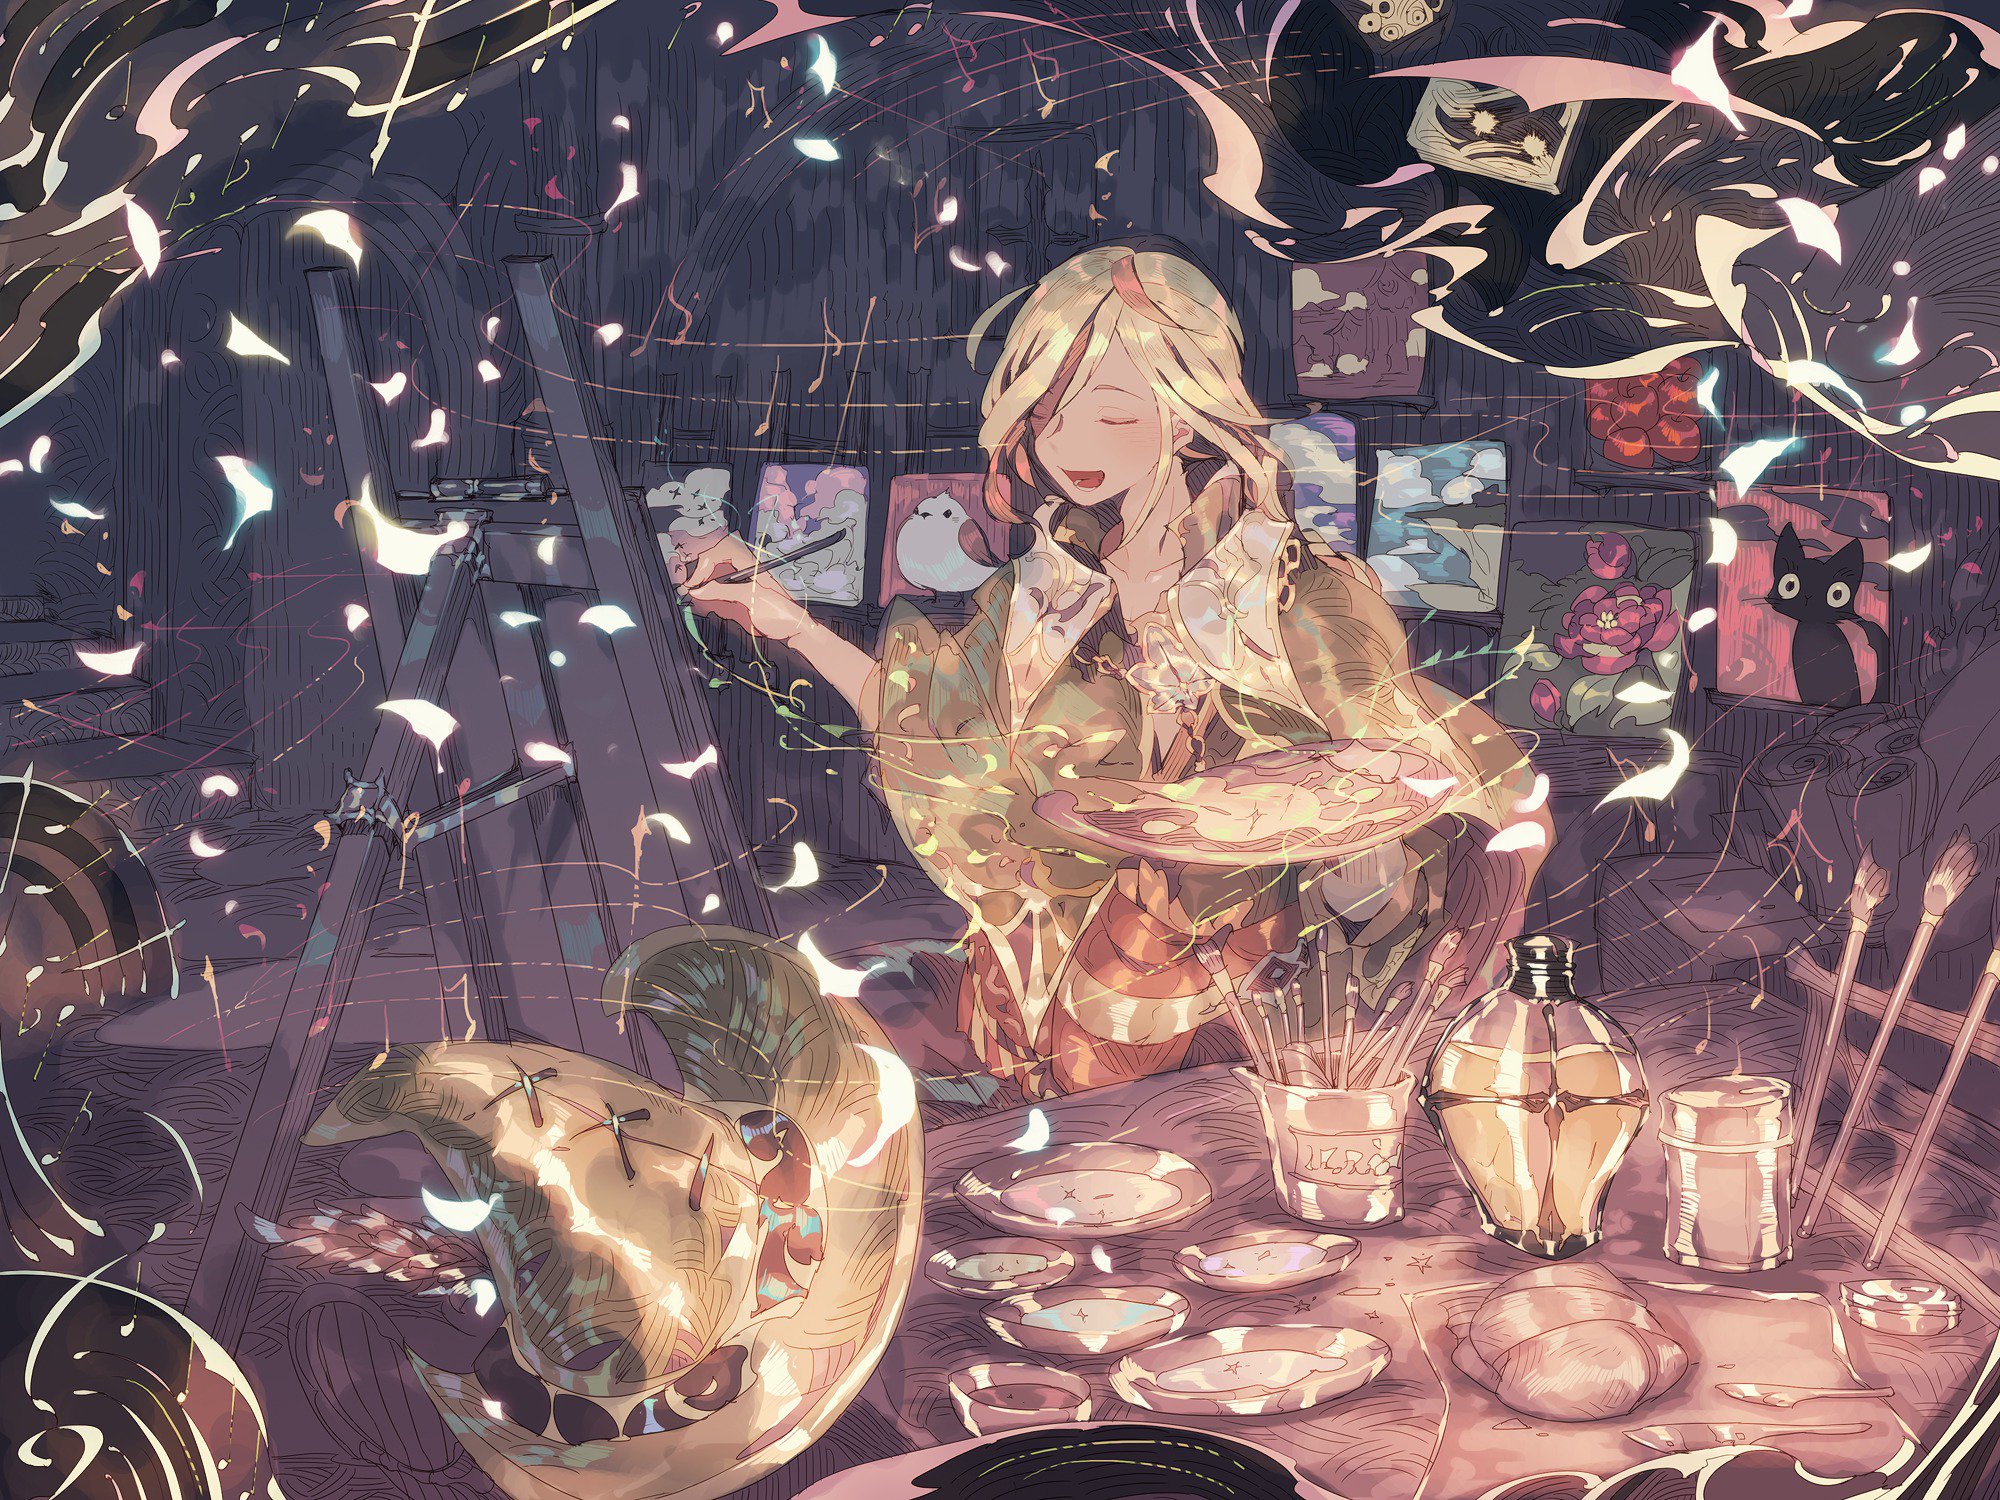 Anime Anime Girls Blonde Long Hair Painting Hat Brush Table Plates Canvas Closed Eyes 2000x1500